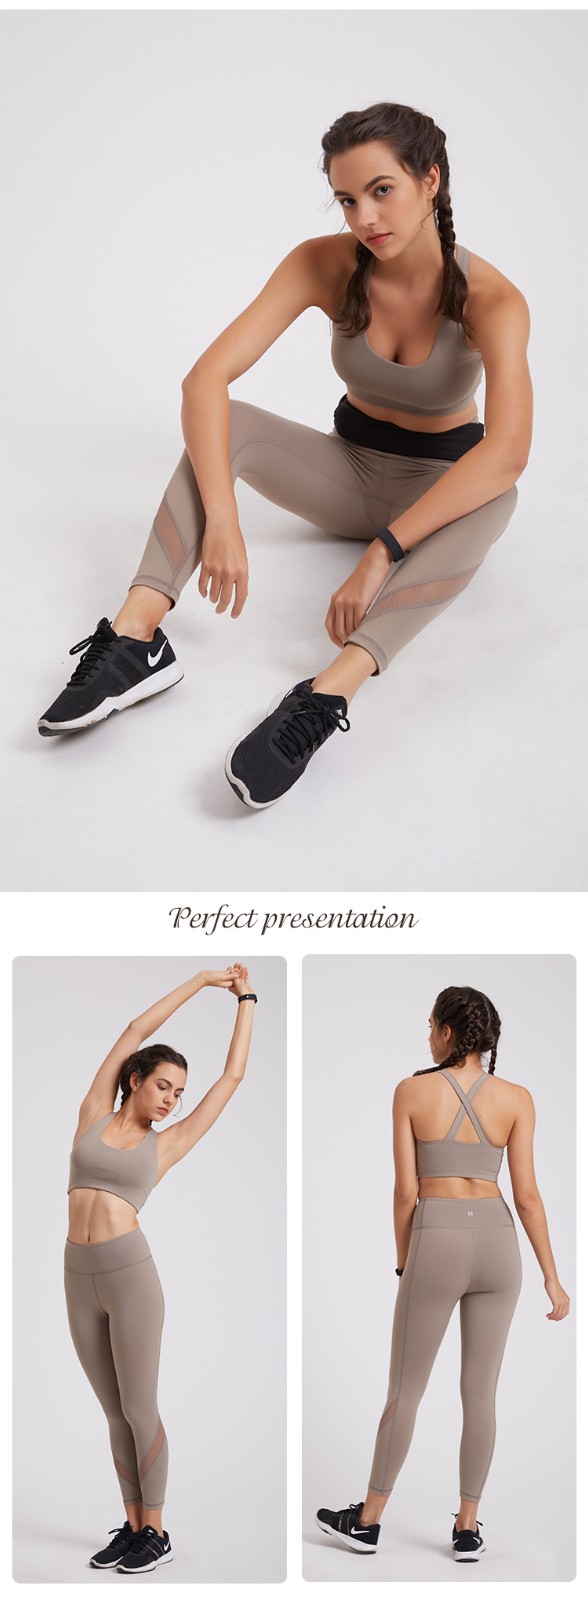 INGOR affordable yoga clothes supplier for women-6